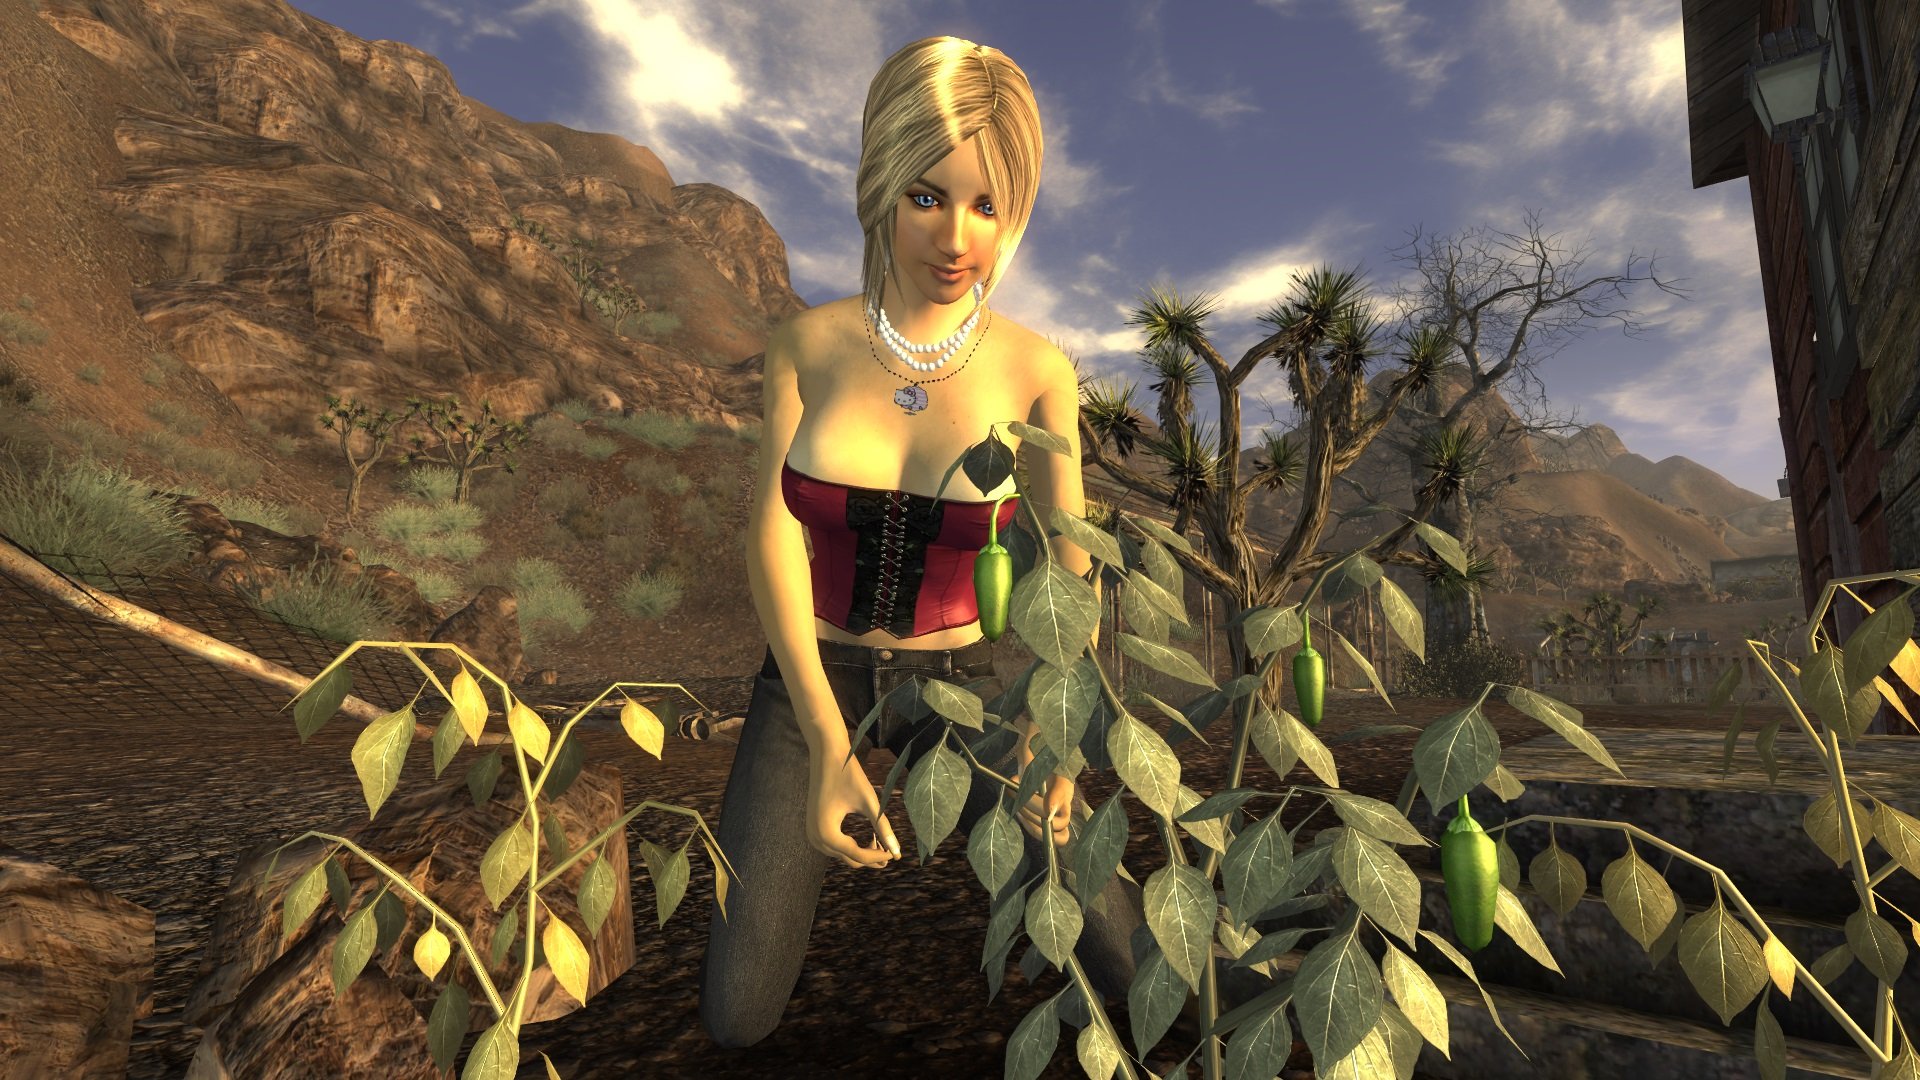 Willow Fallout 3 Porn - Sexout breeder - 64 photo